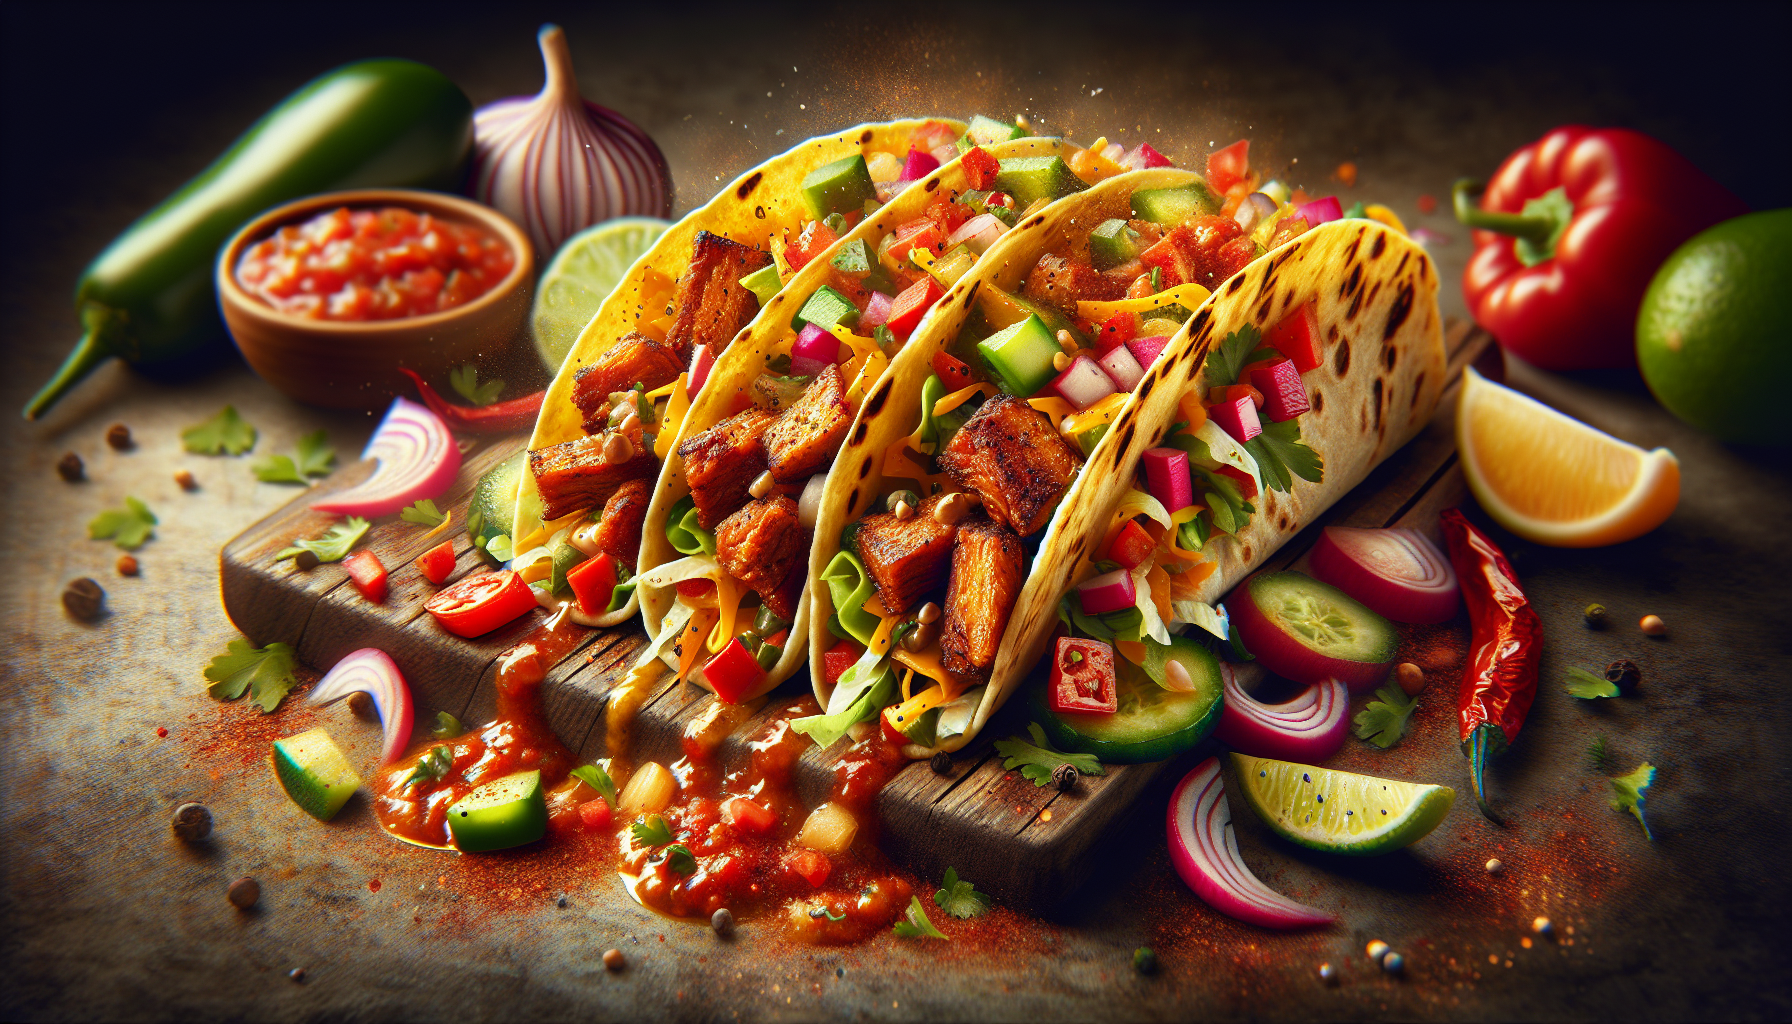 Share Your Go-to Mexican Recipe Thats Both Quick And Satisfying.